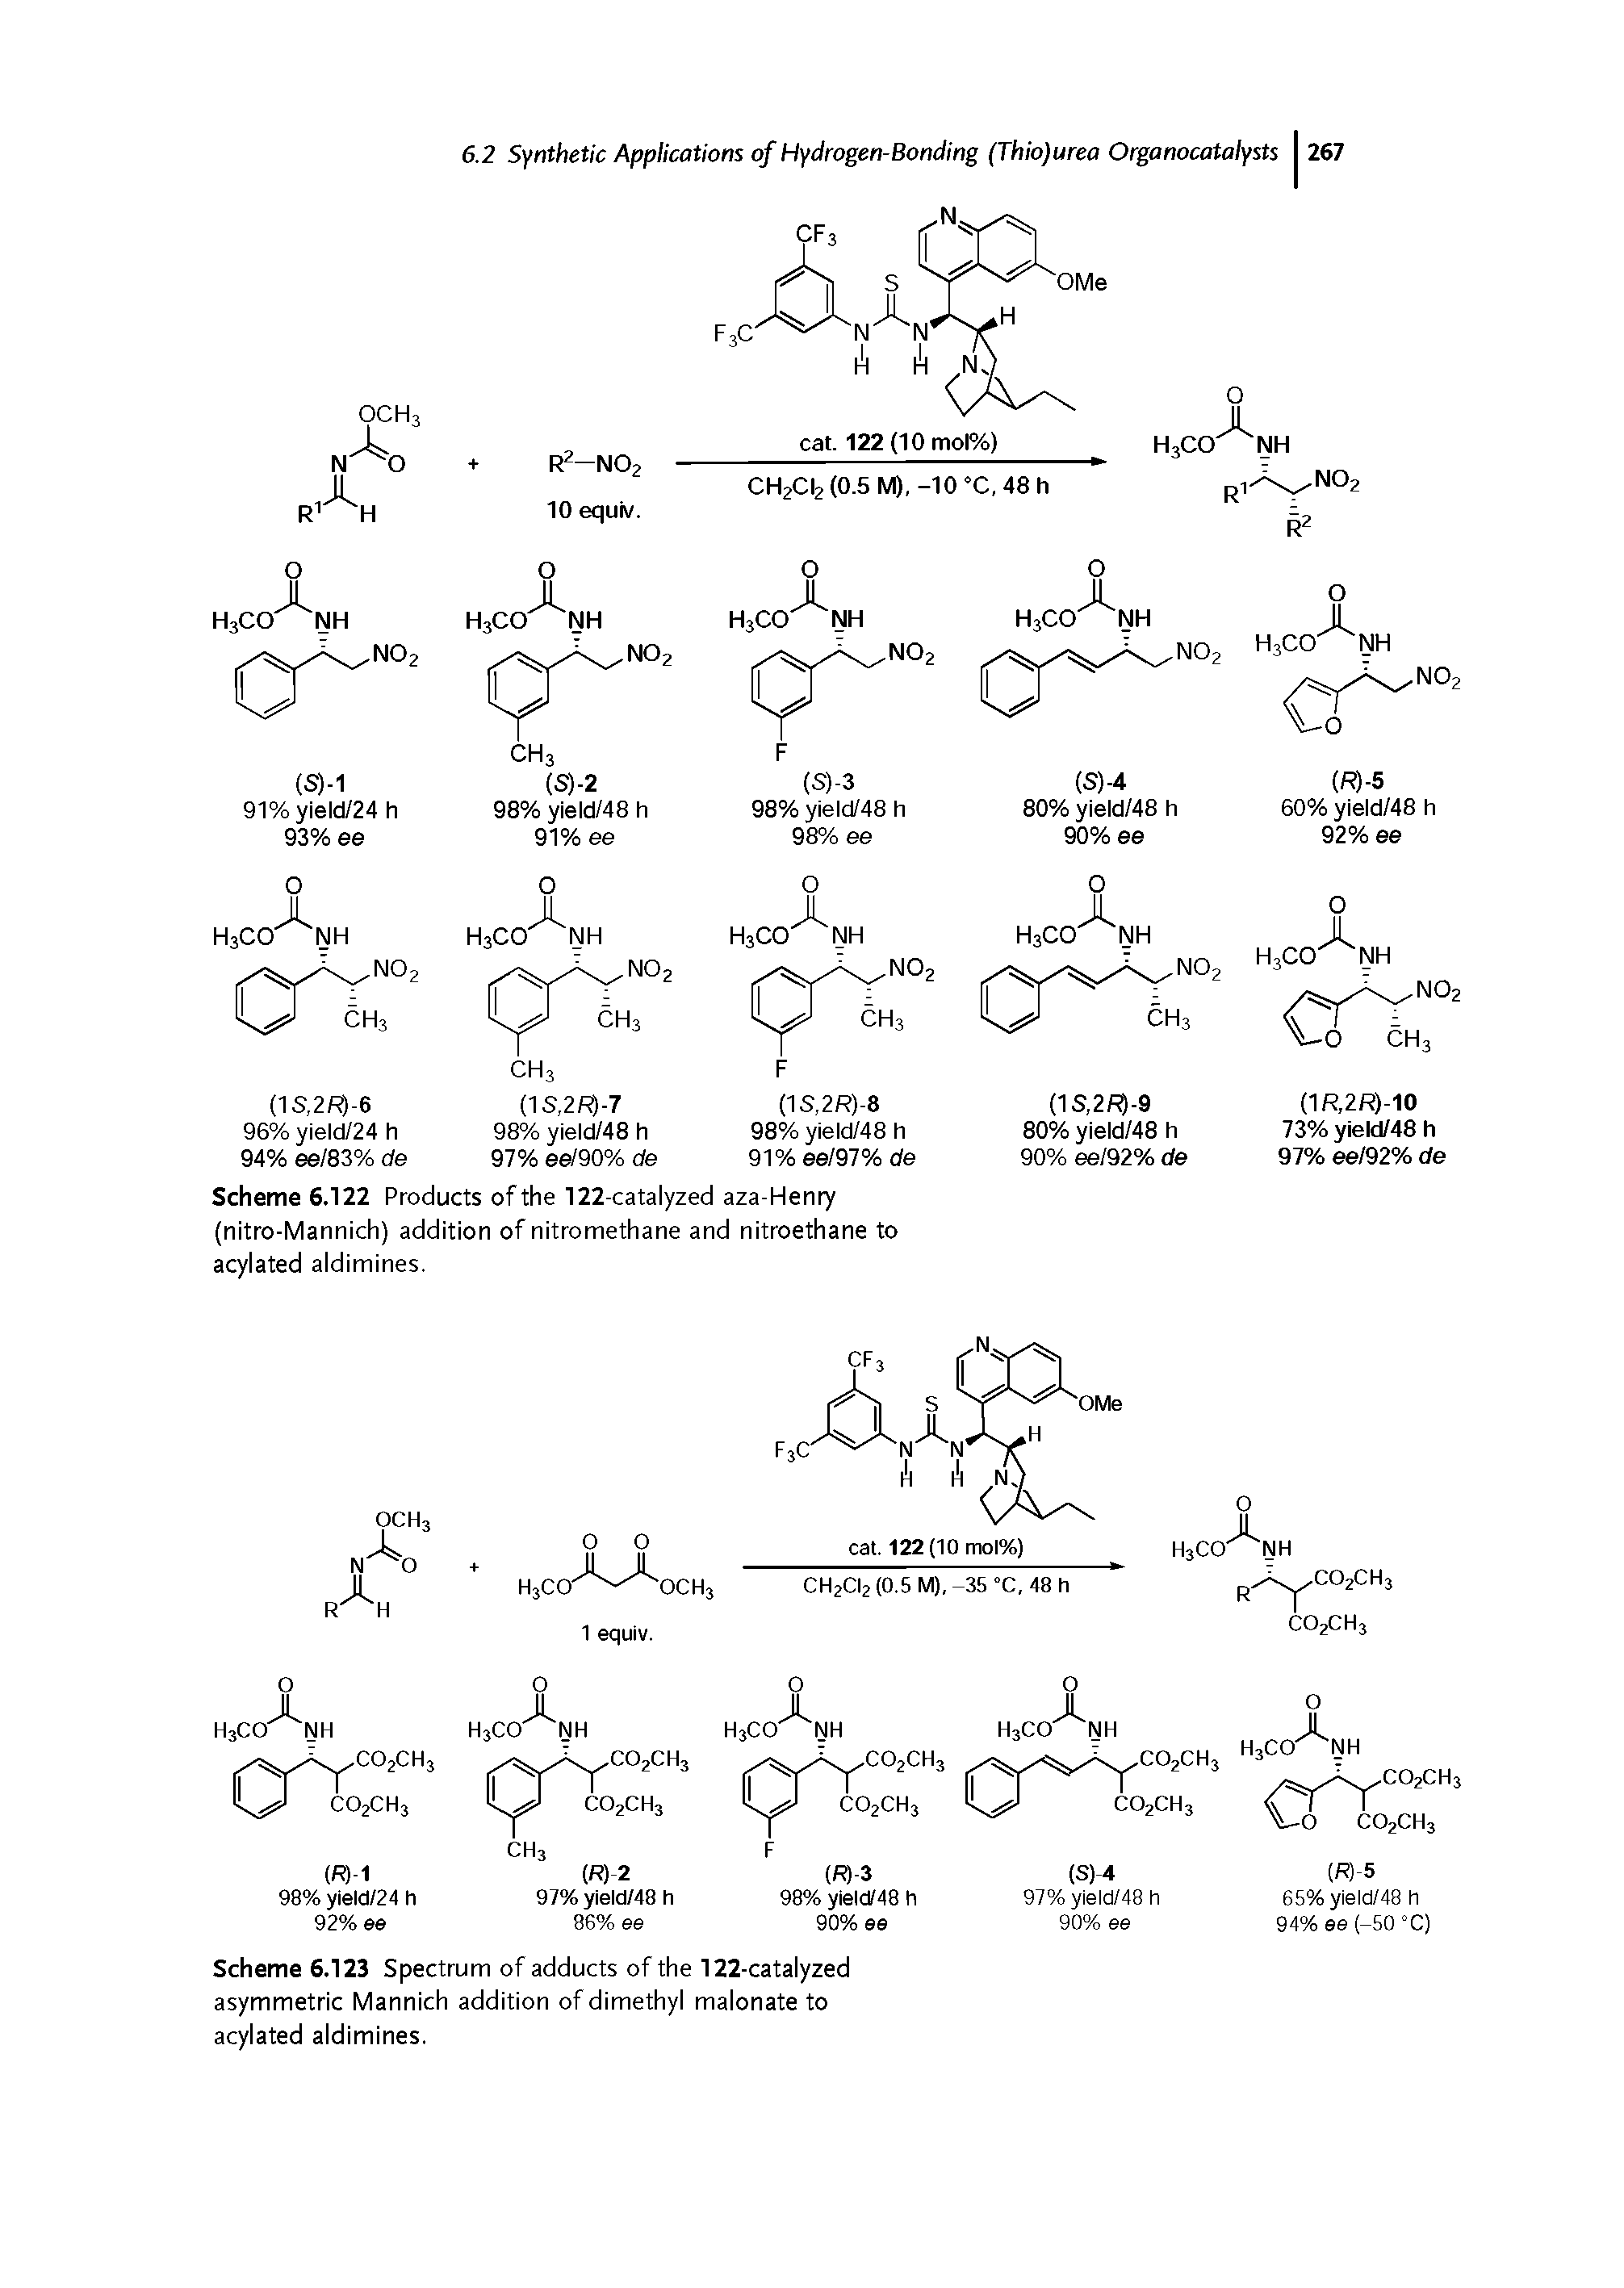 Scheme 6.123 Spectrum of adducts of the 122-catalyzed asymmetric Mannich addition of dimethyl malonate to acylated aldimines.